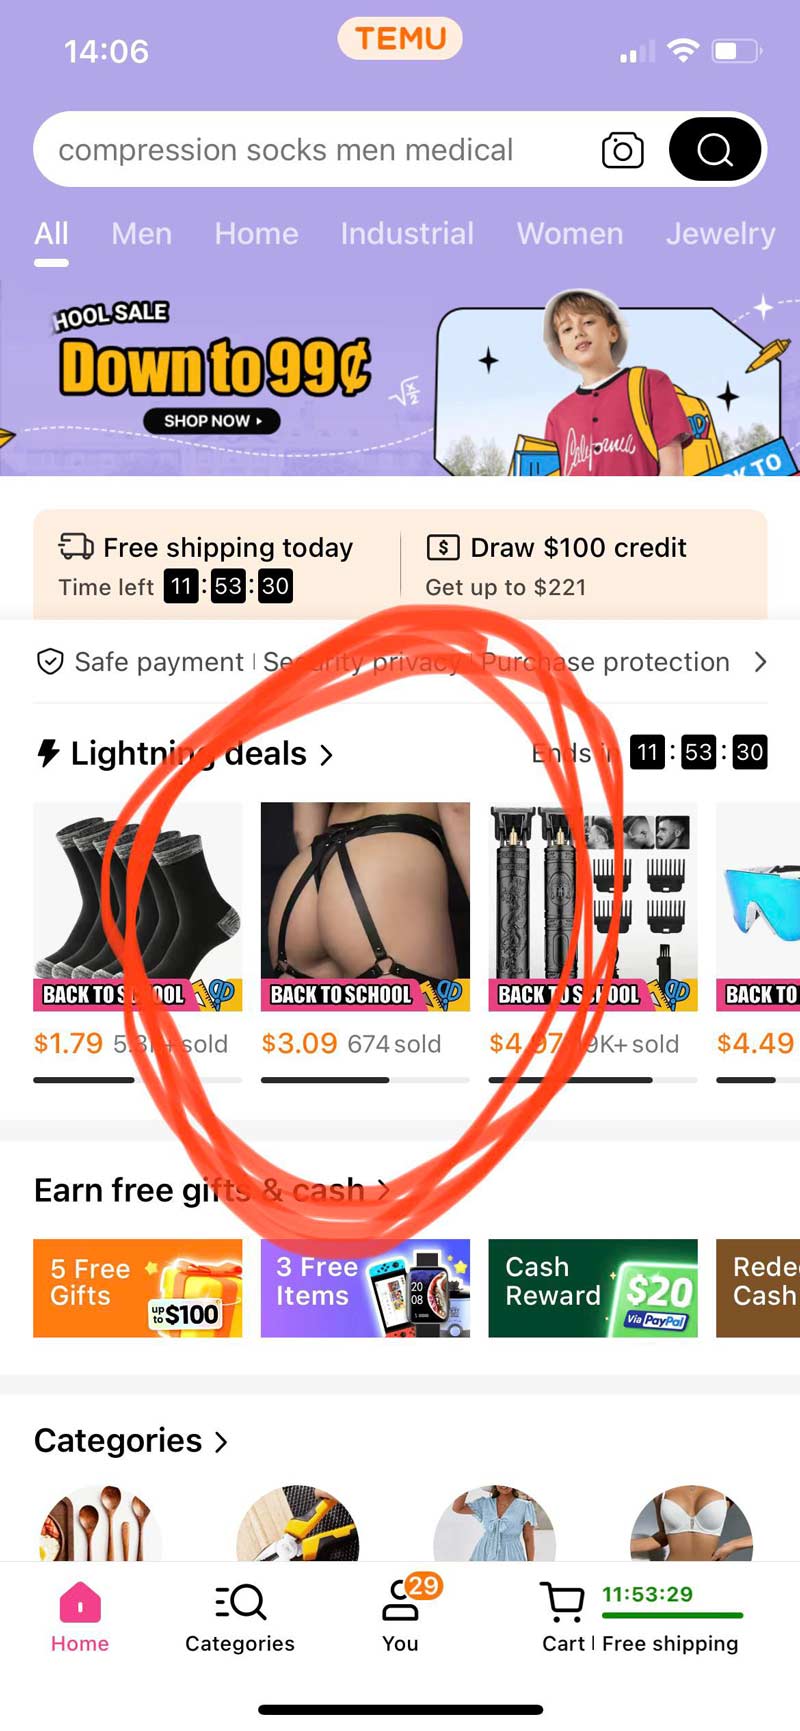 What sort of school does this site think I am shopping for?